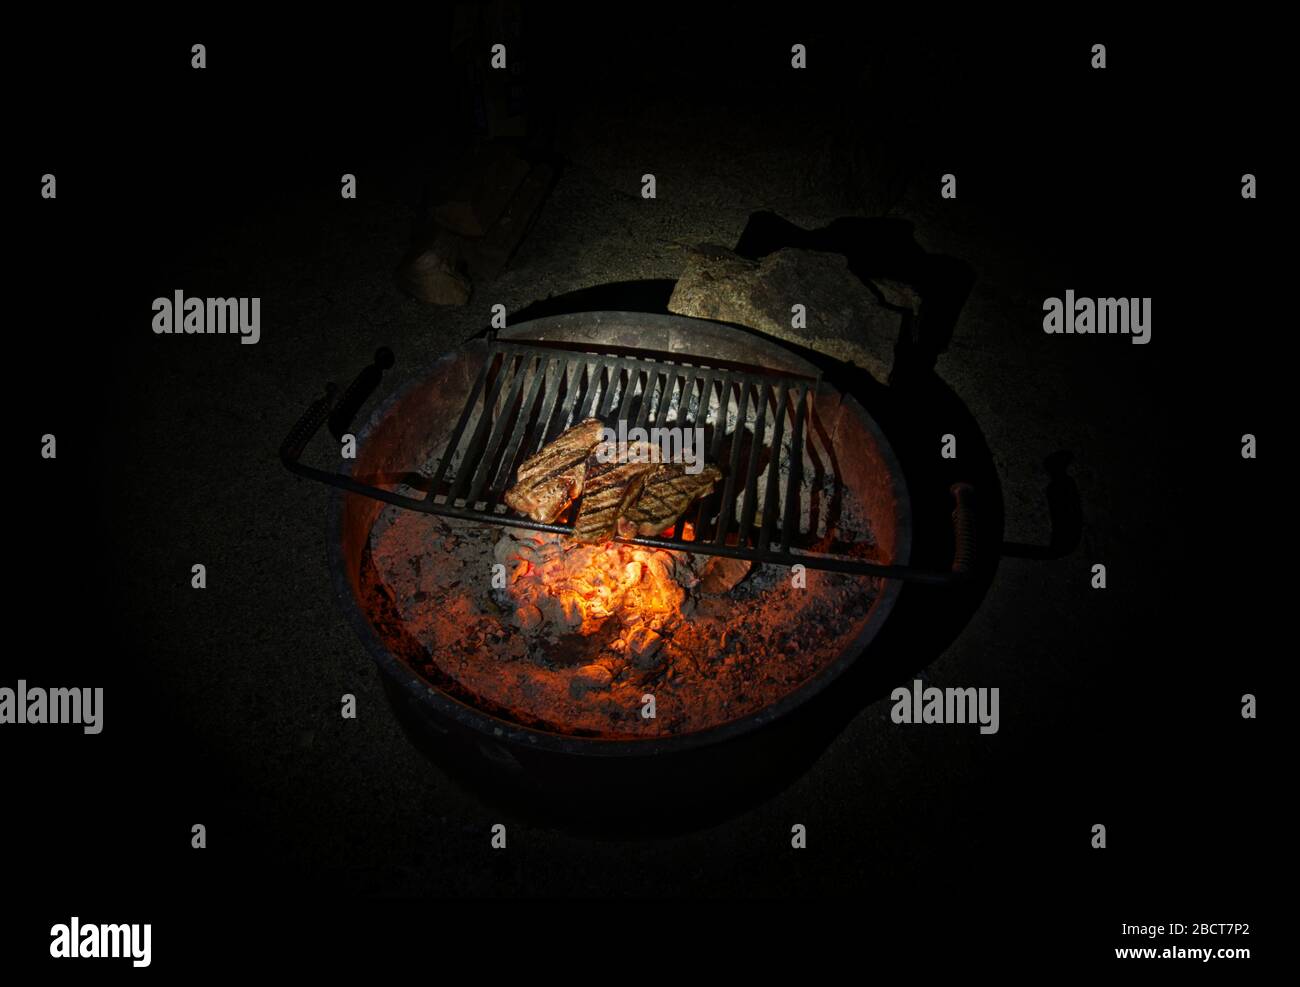 Three ready grilled steaks on a round fire bowl at the bottom Stock Photo